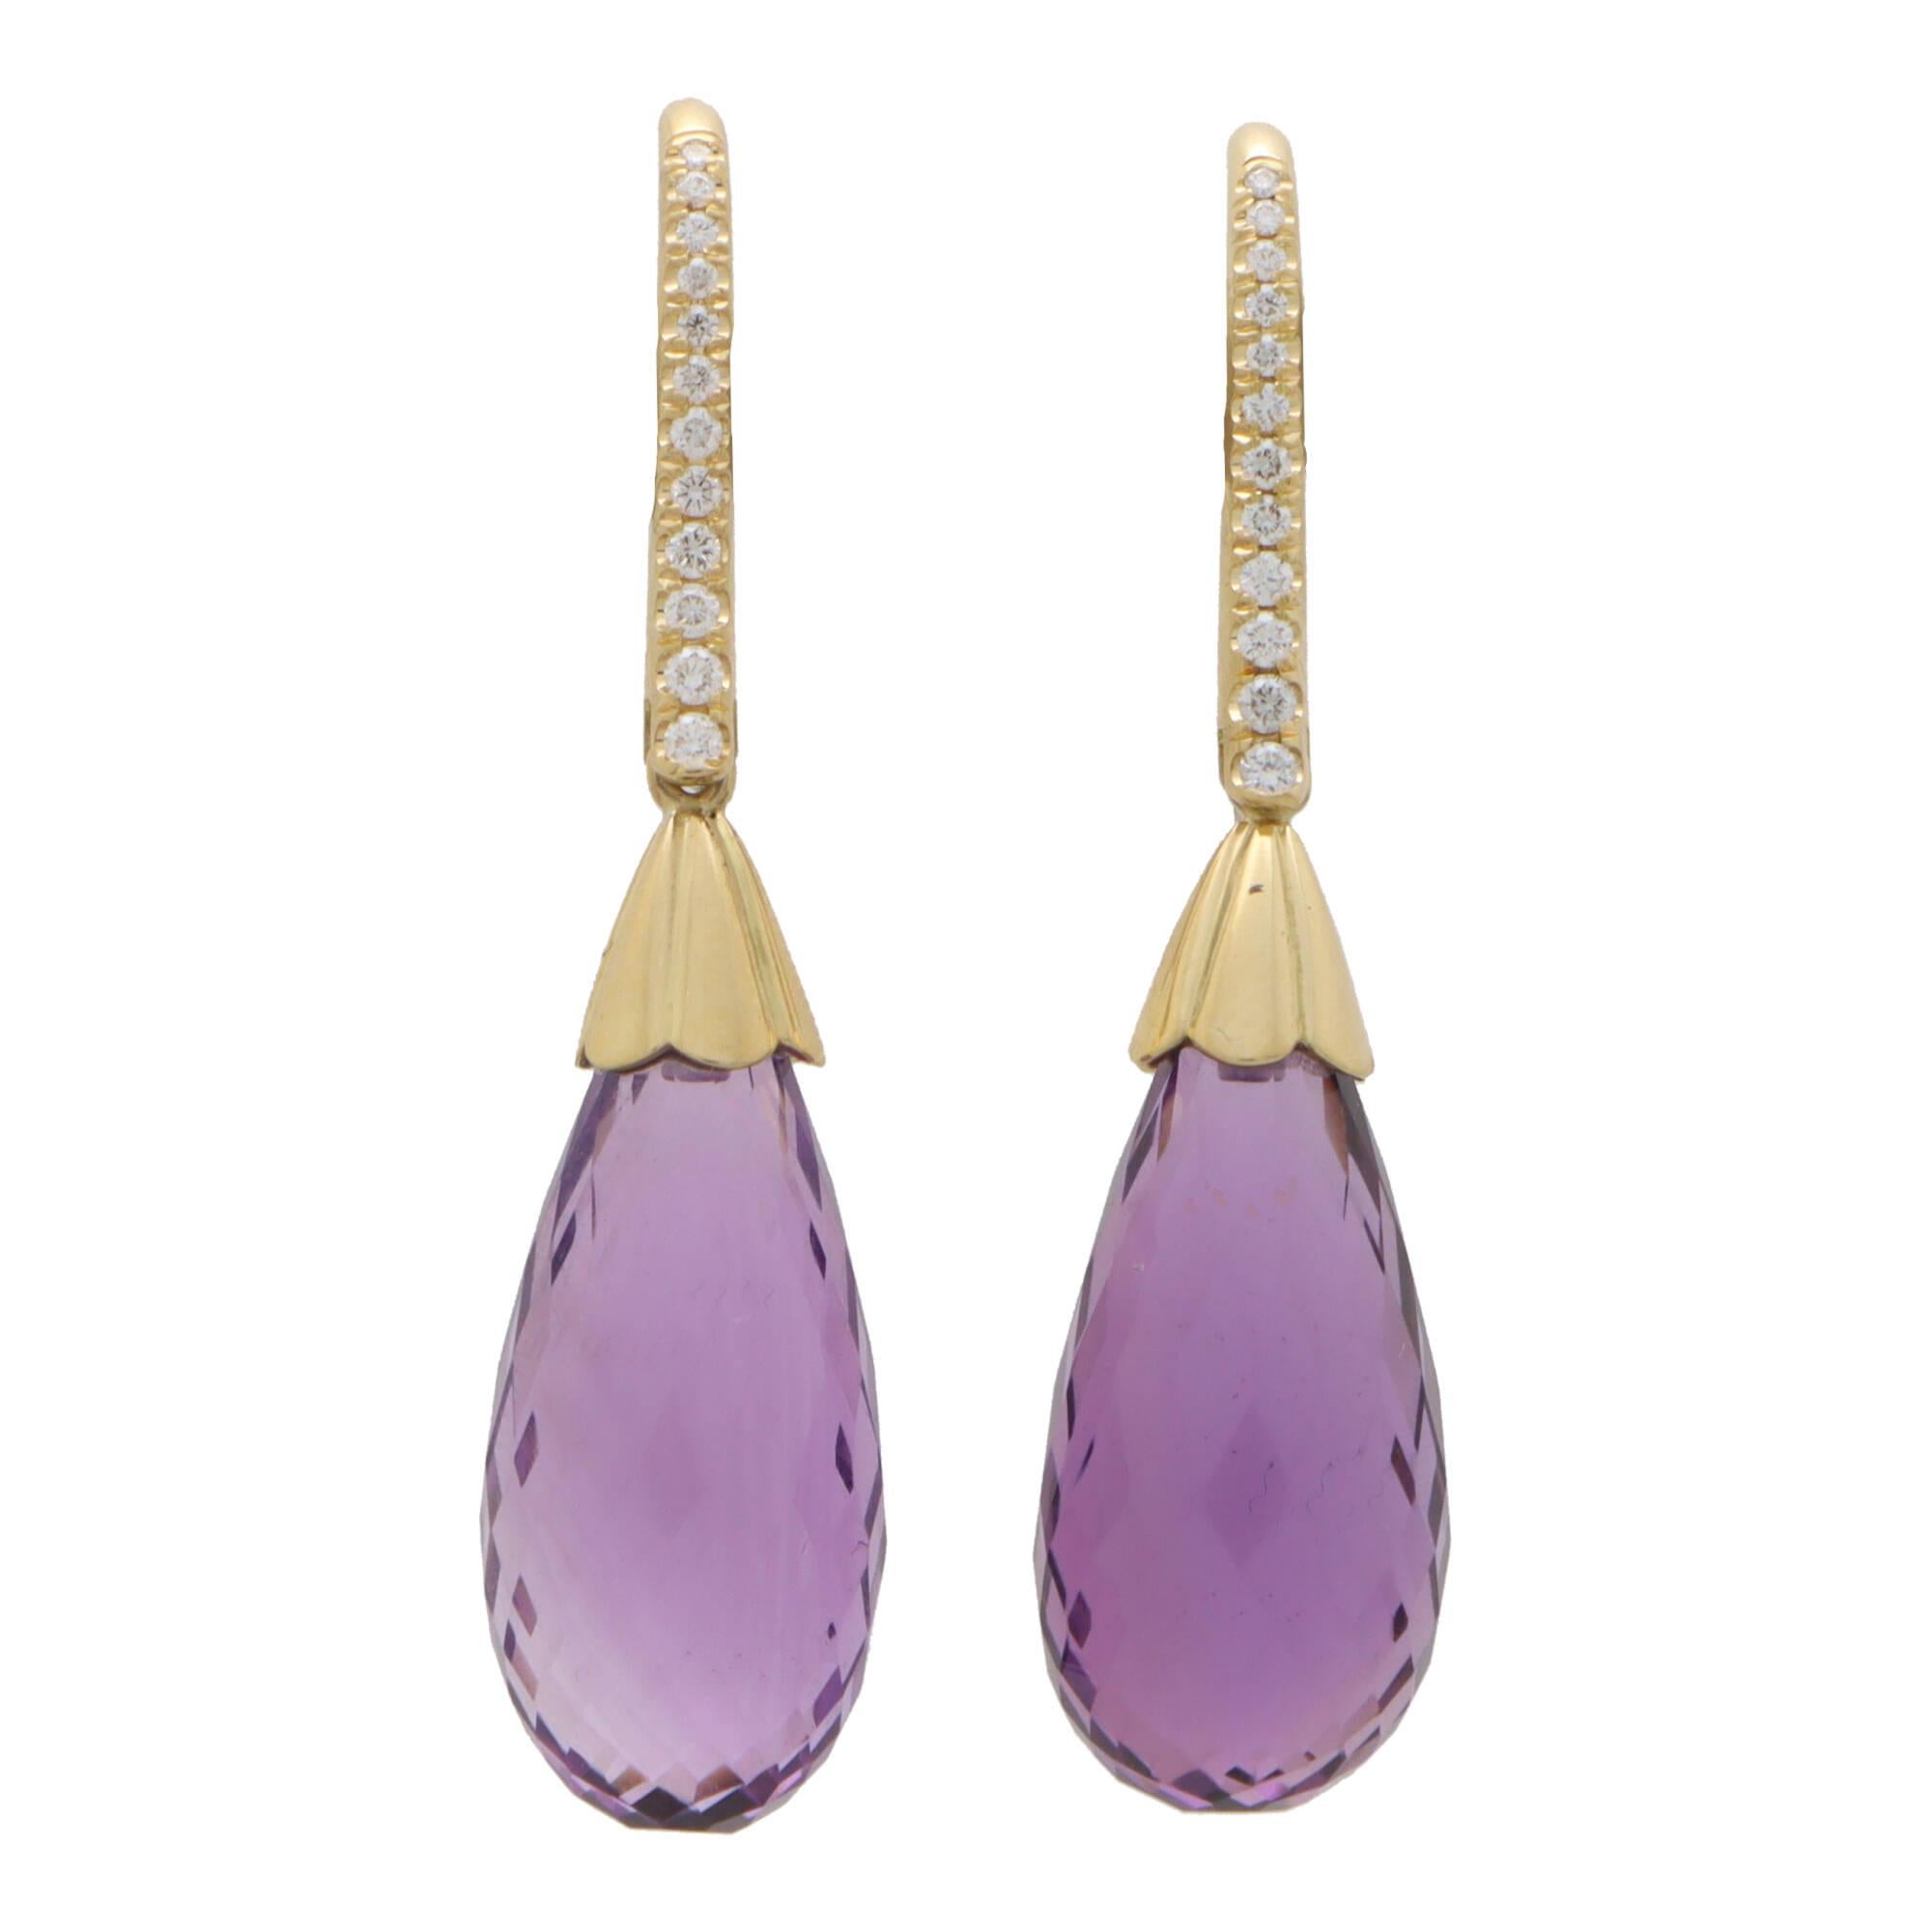 Contemporary Briolette Cut Amethyst and Diamond Drop Earrings 1